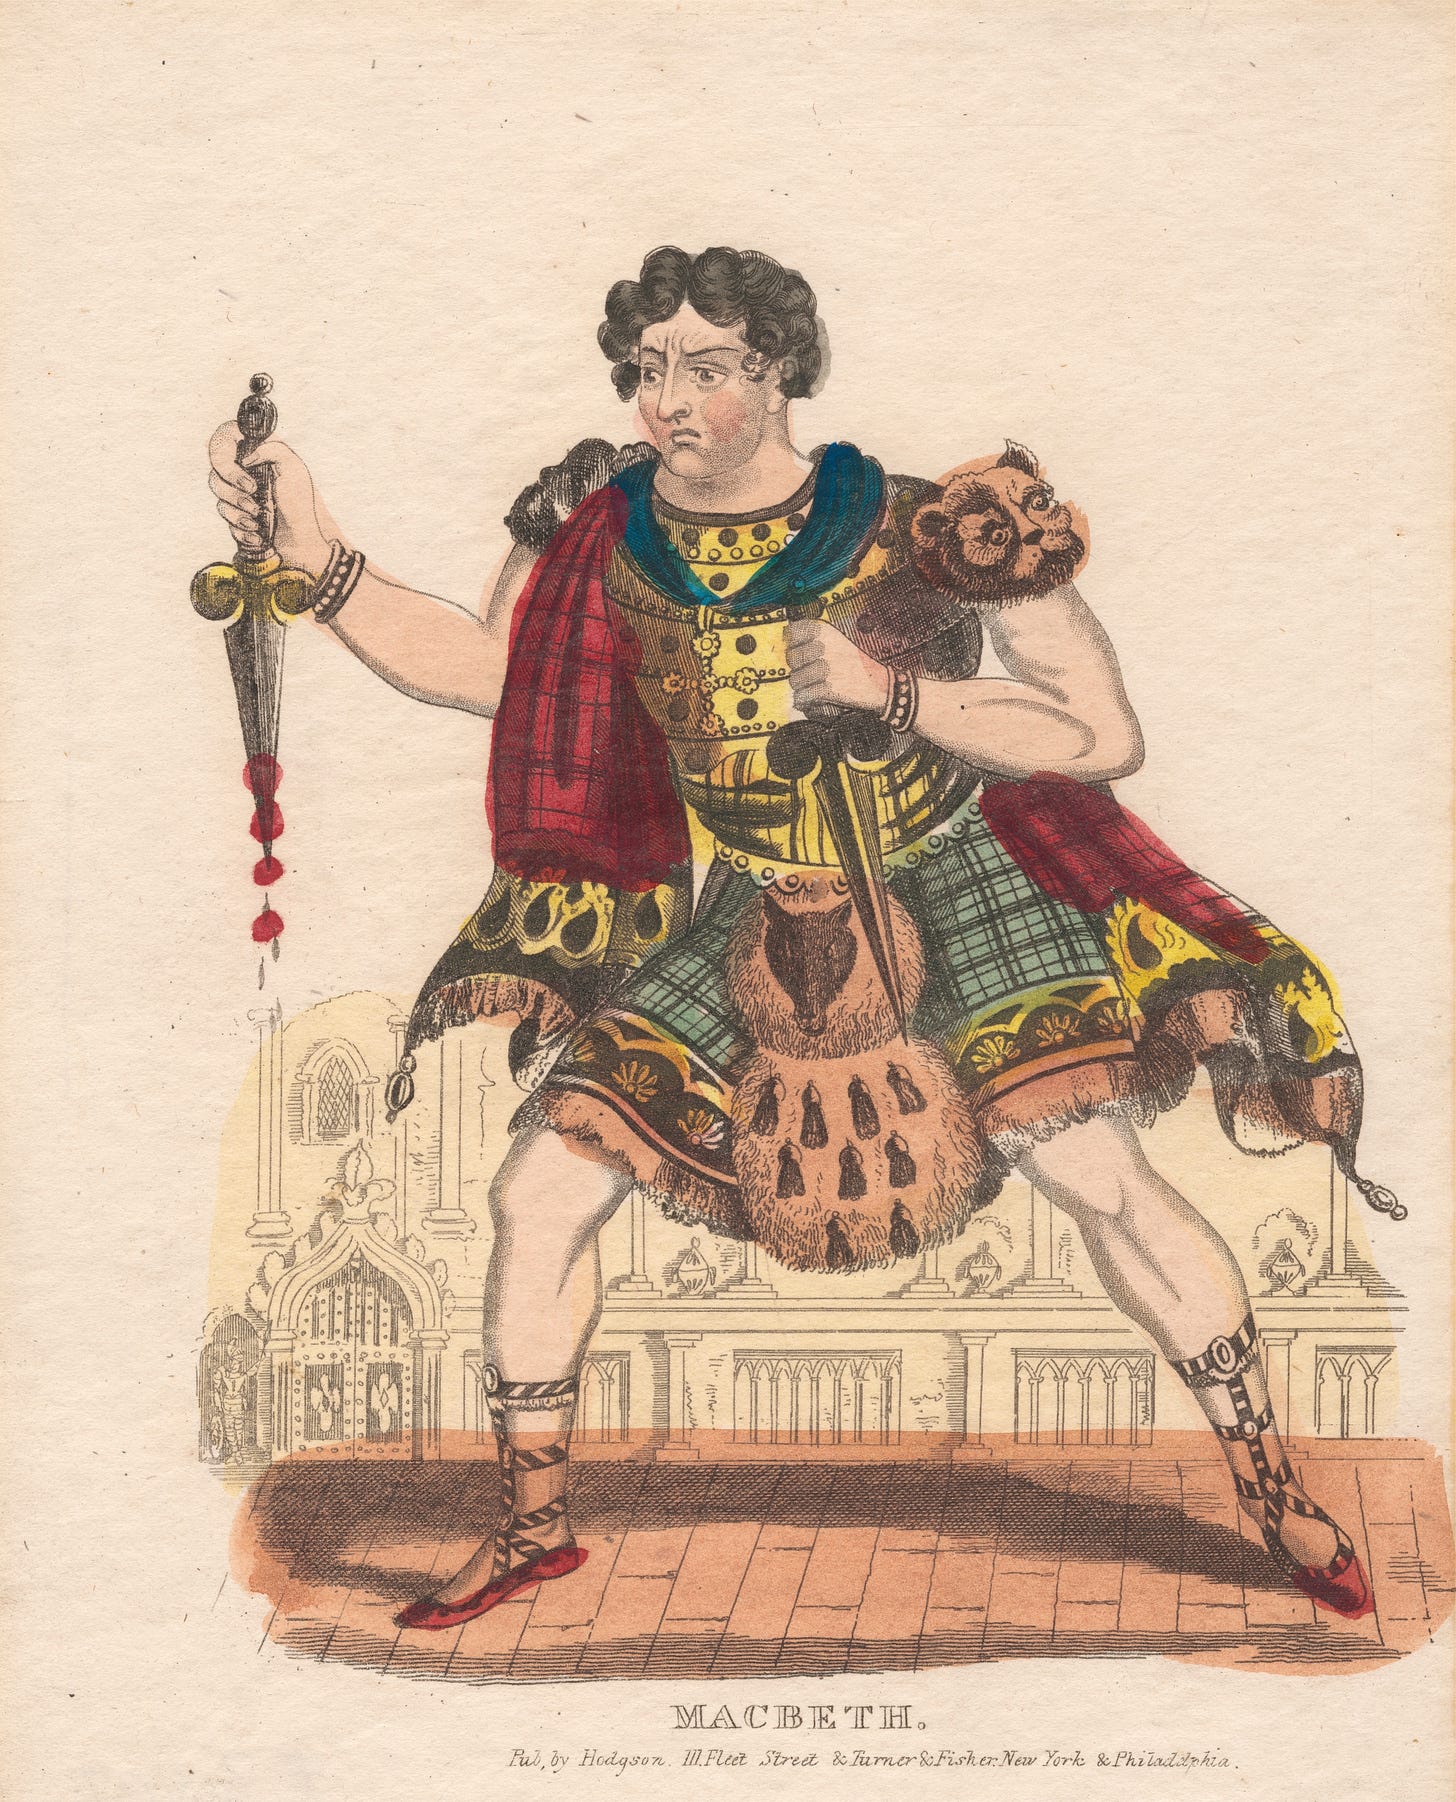 Actor dressed in tartans holding daggers, one dripping blood